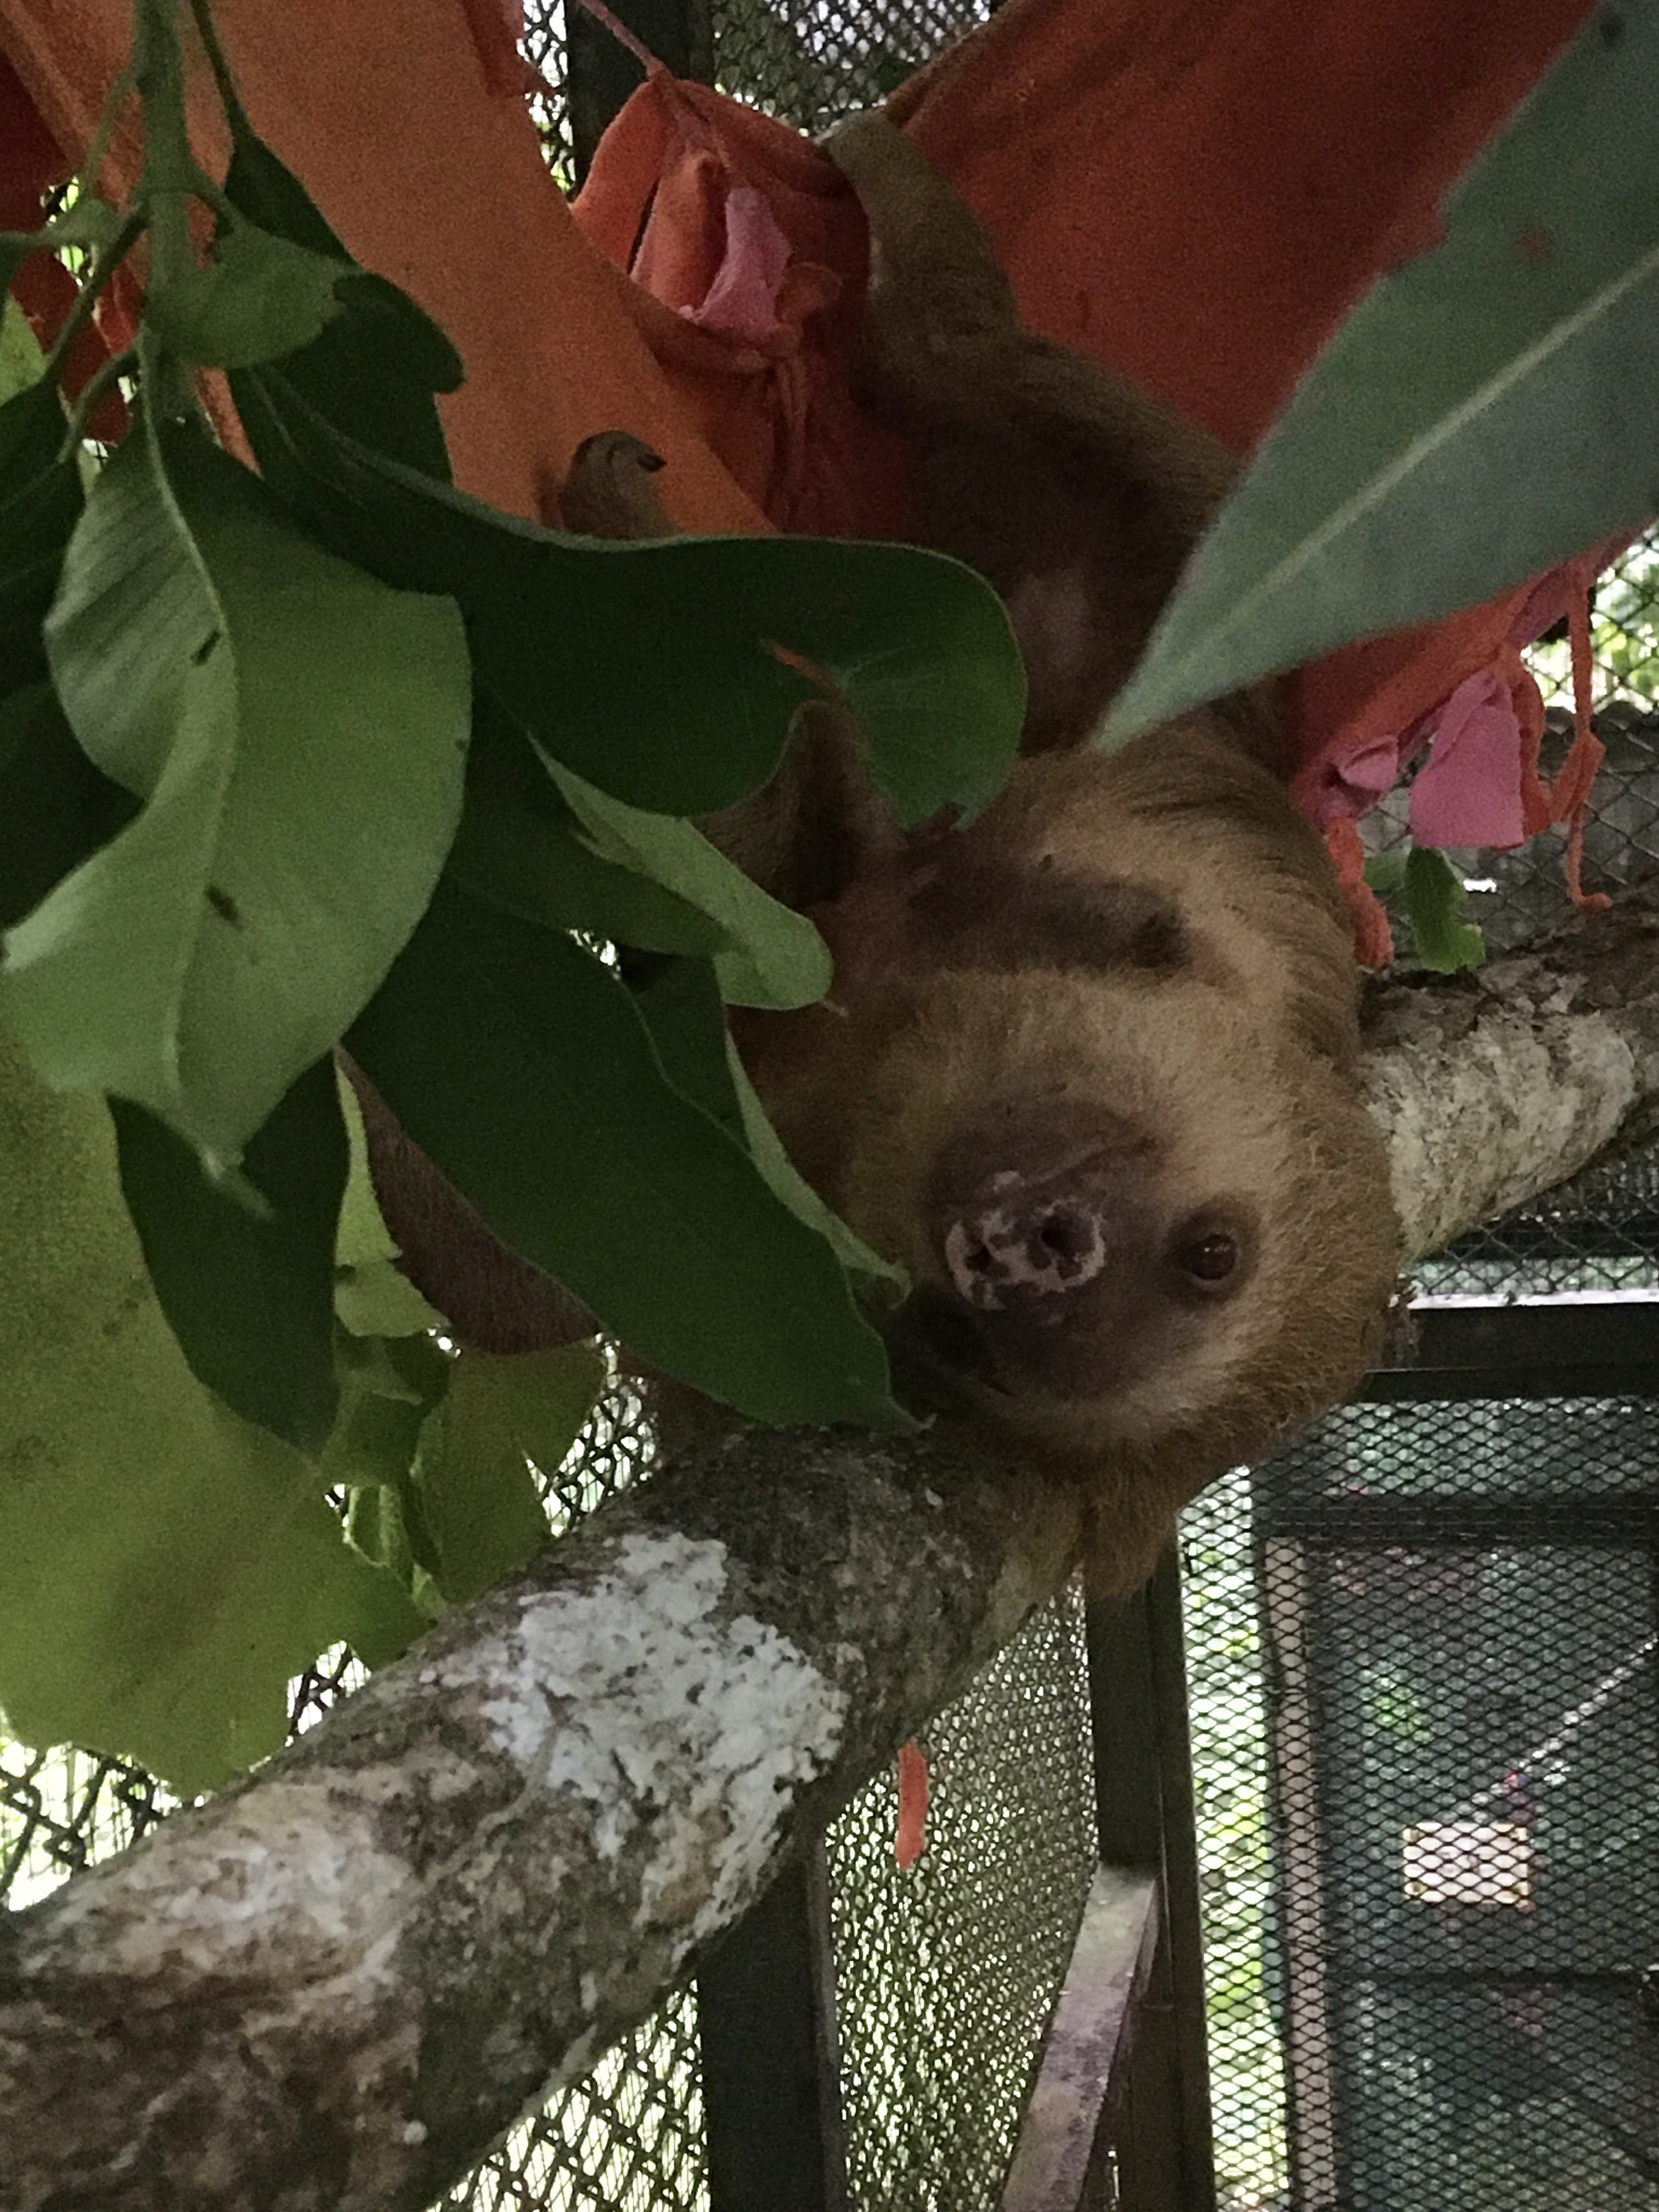 A sloth shown in an enclosure.